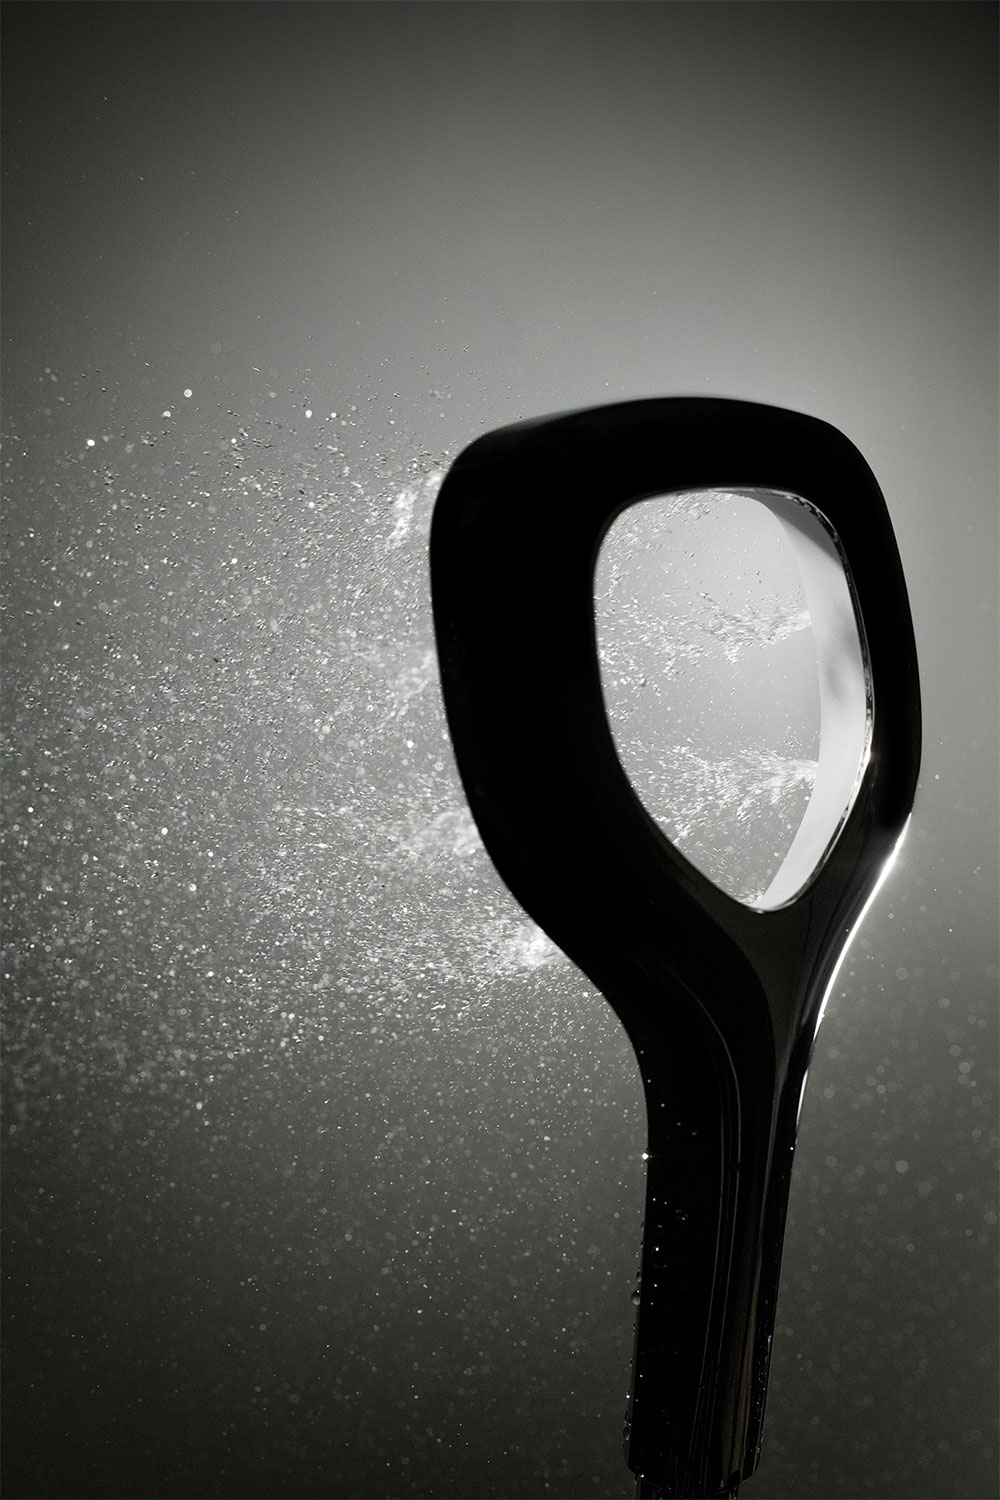 High speed photography of water spray from a shower handset (1/8000th second)